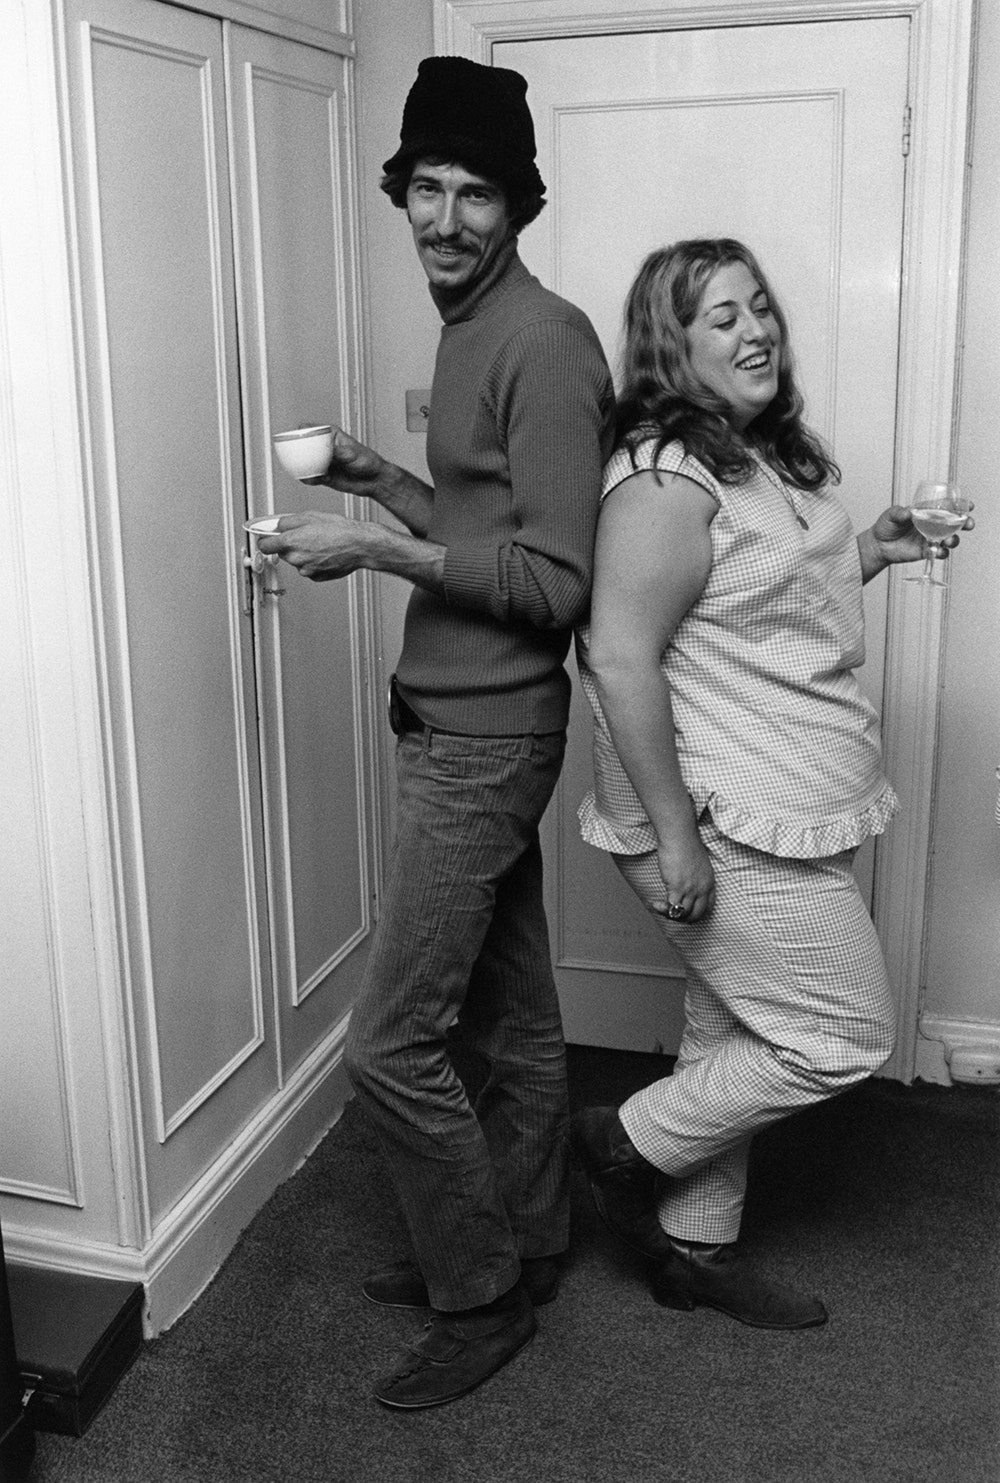 John Phillips and Cass Elliot posing with their backs against each other